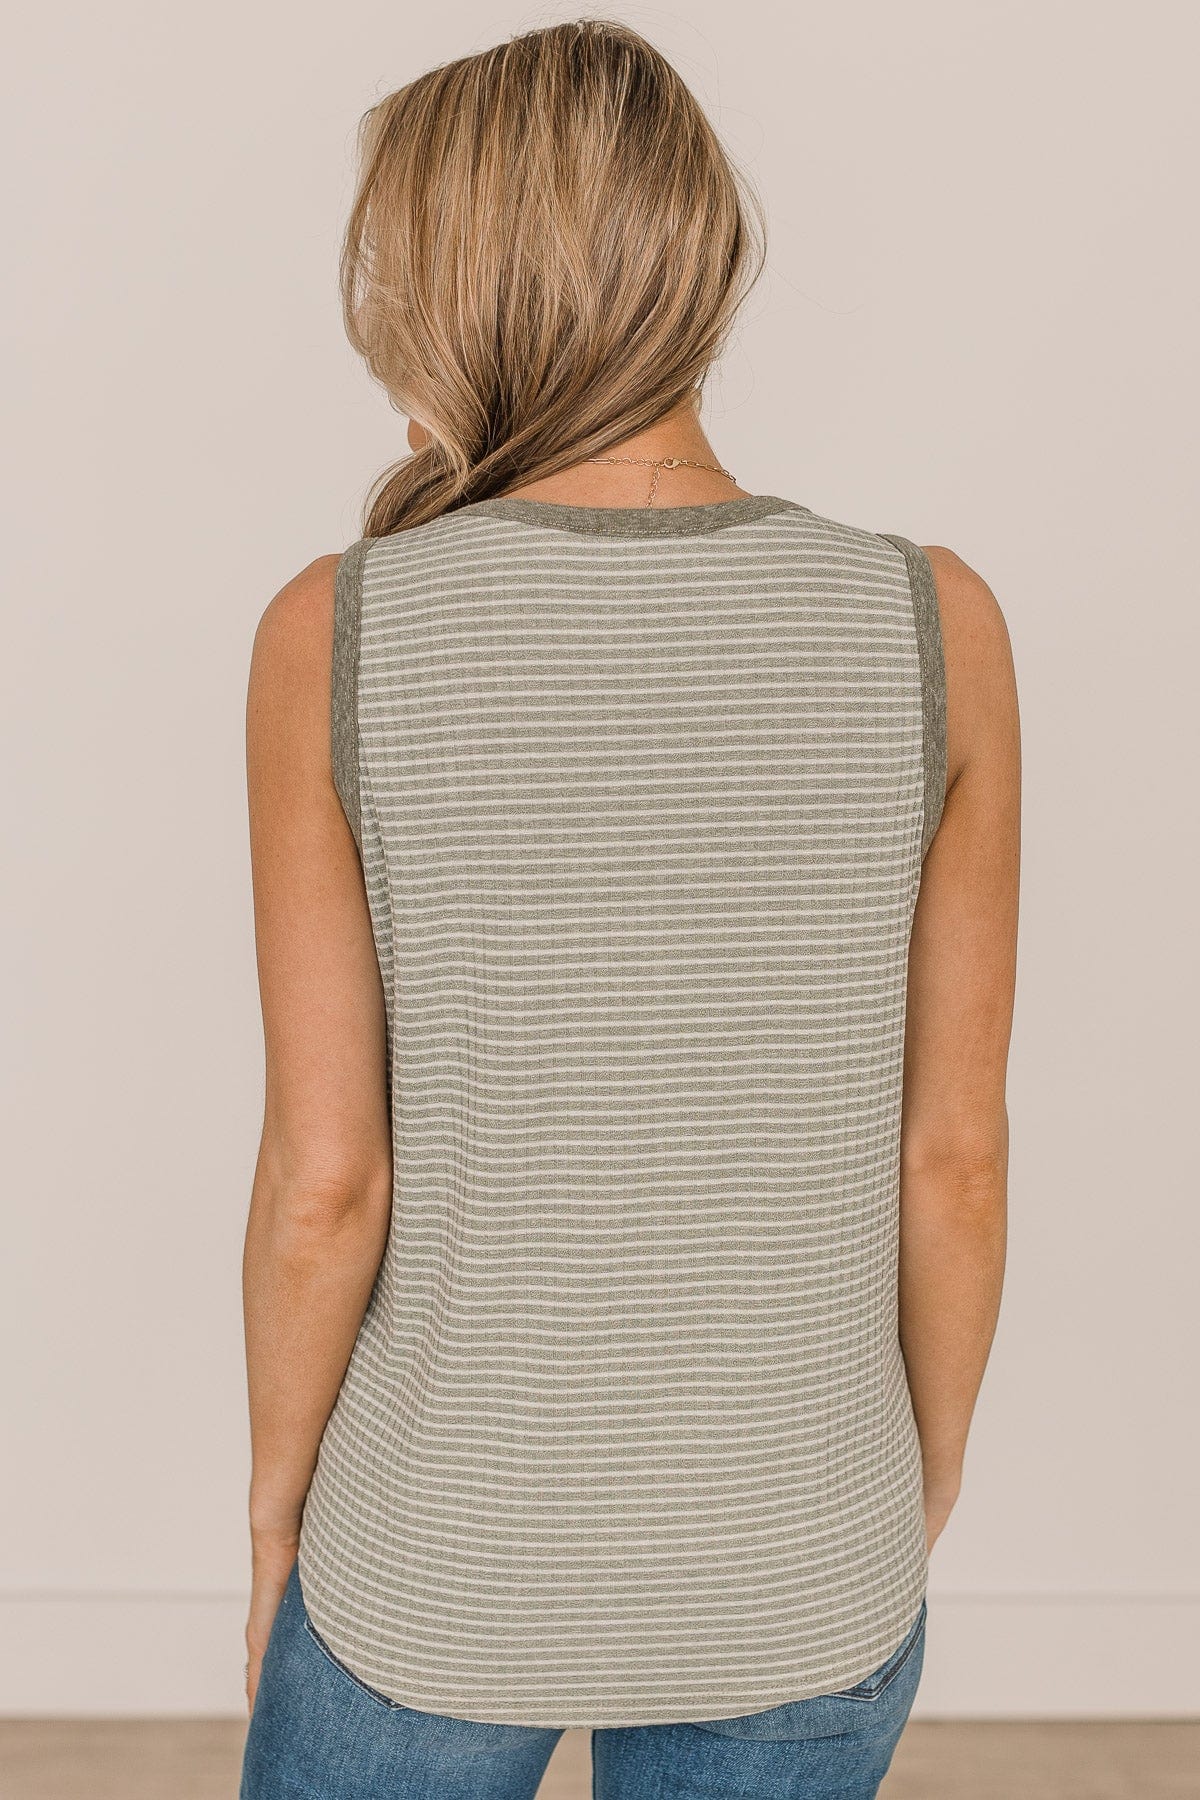 Chasing After You Striped Tank Top- Light Olive